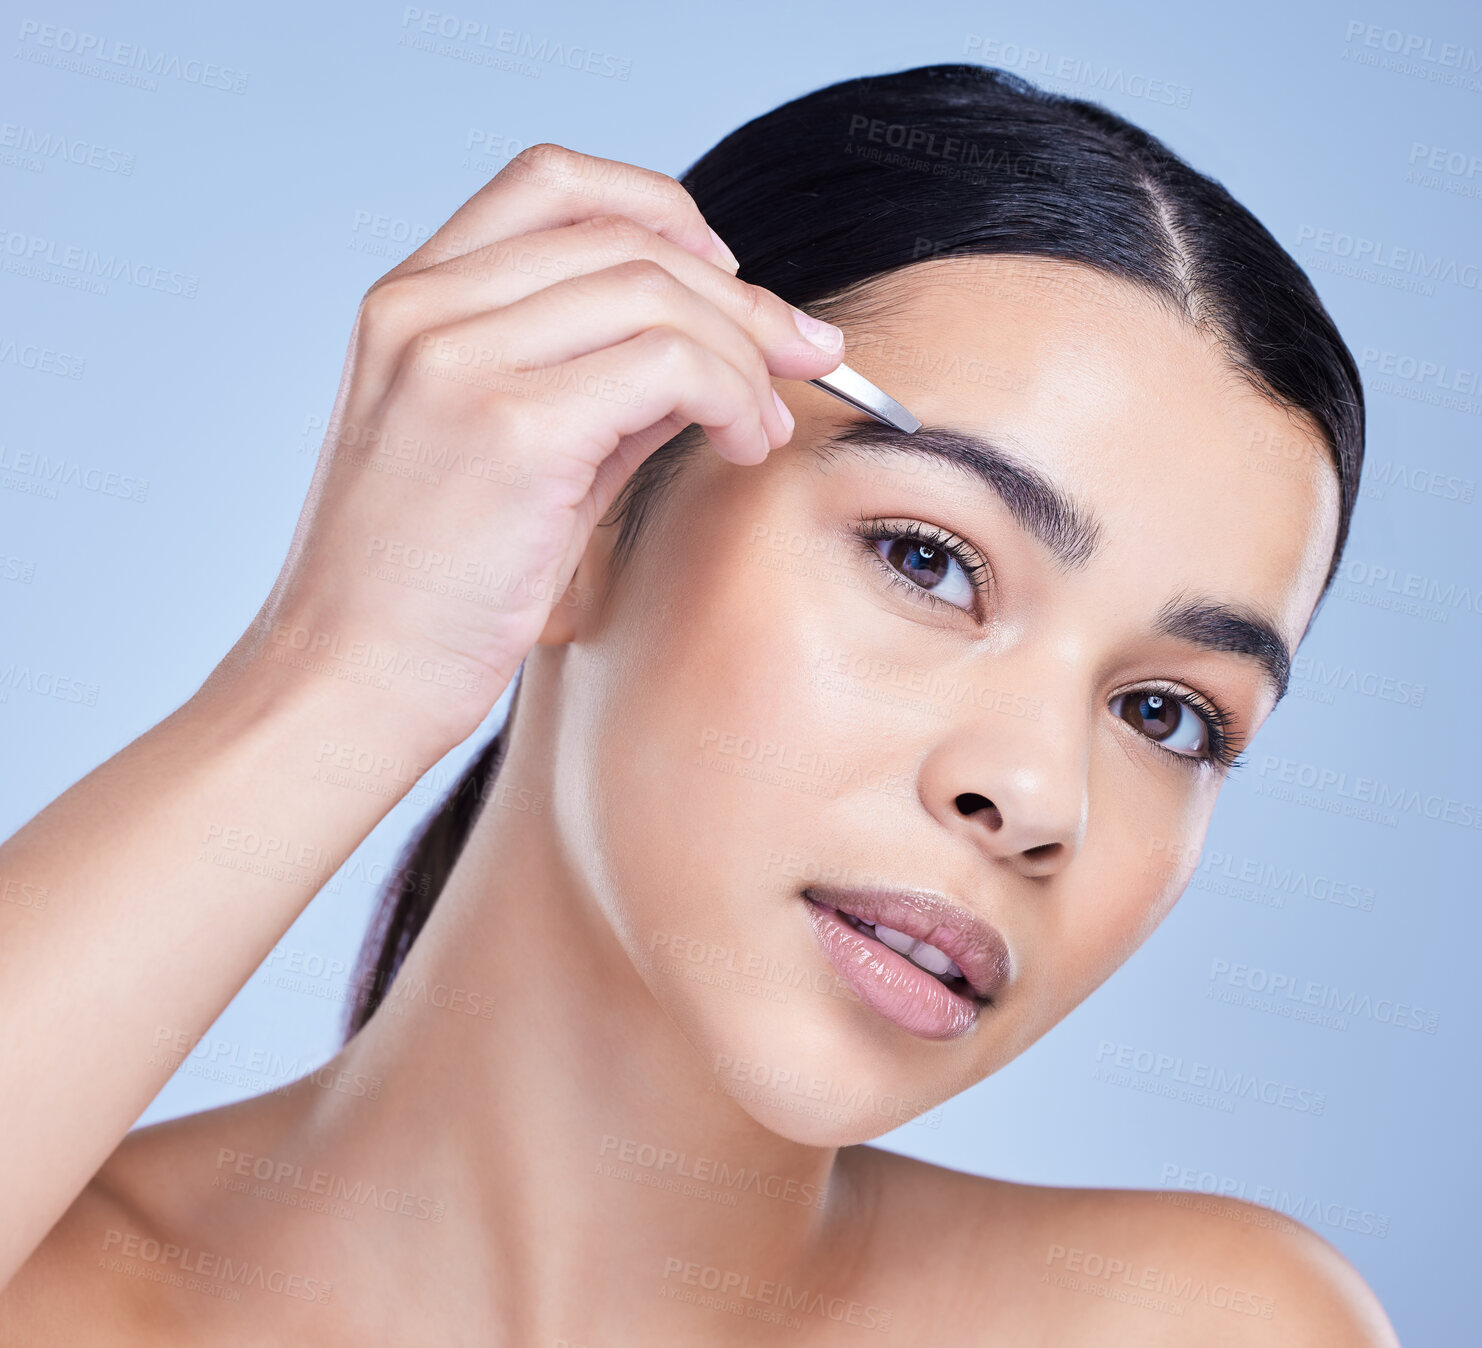 Buy stock photo Studio portrait of a beautiful mixed race young woman with glowing skin posing against blue copyspace background while tweezing her eyebrows. Hispanic model using a tweezer for hair removal